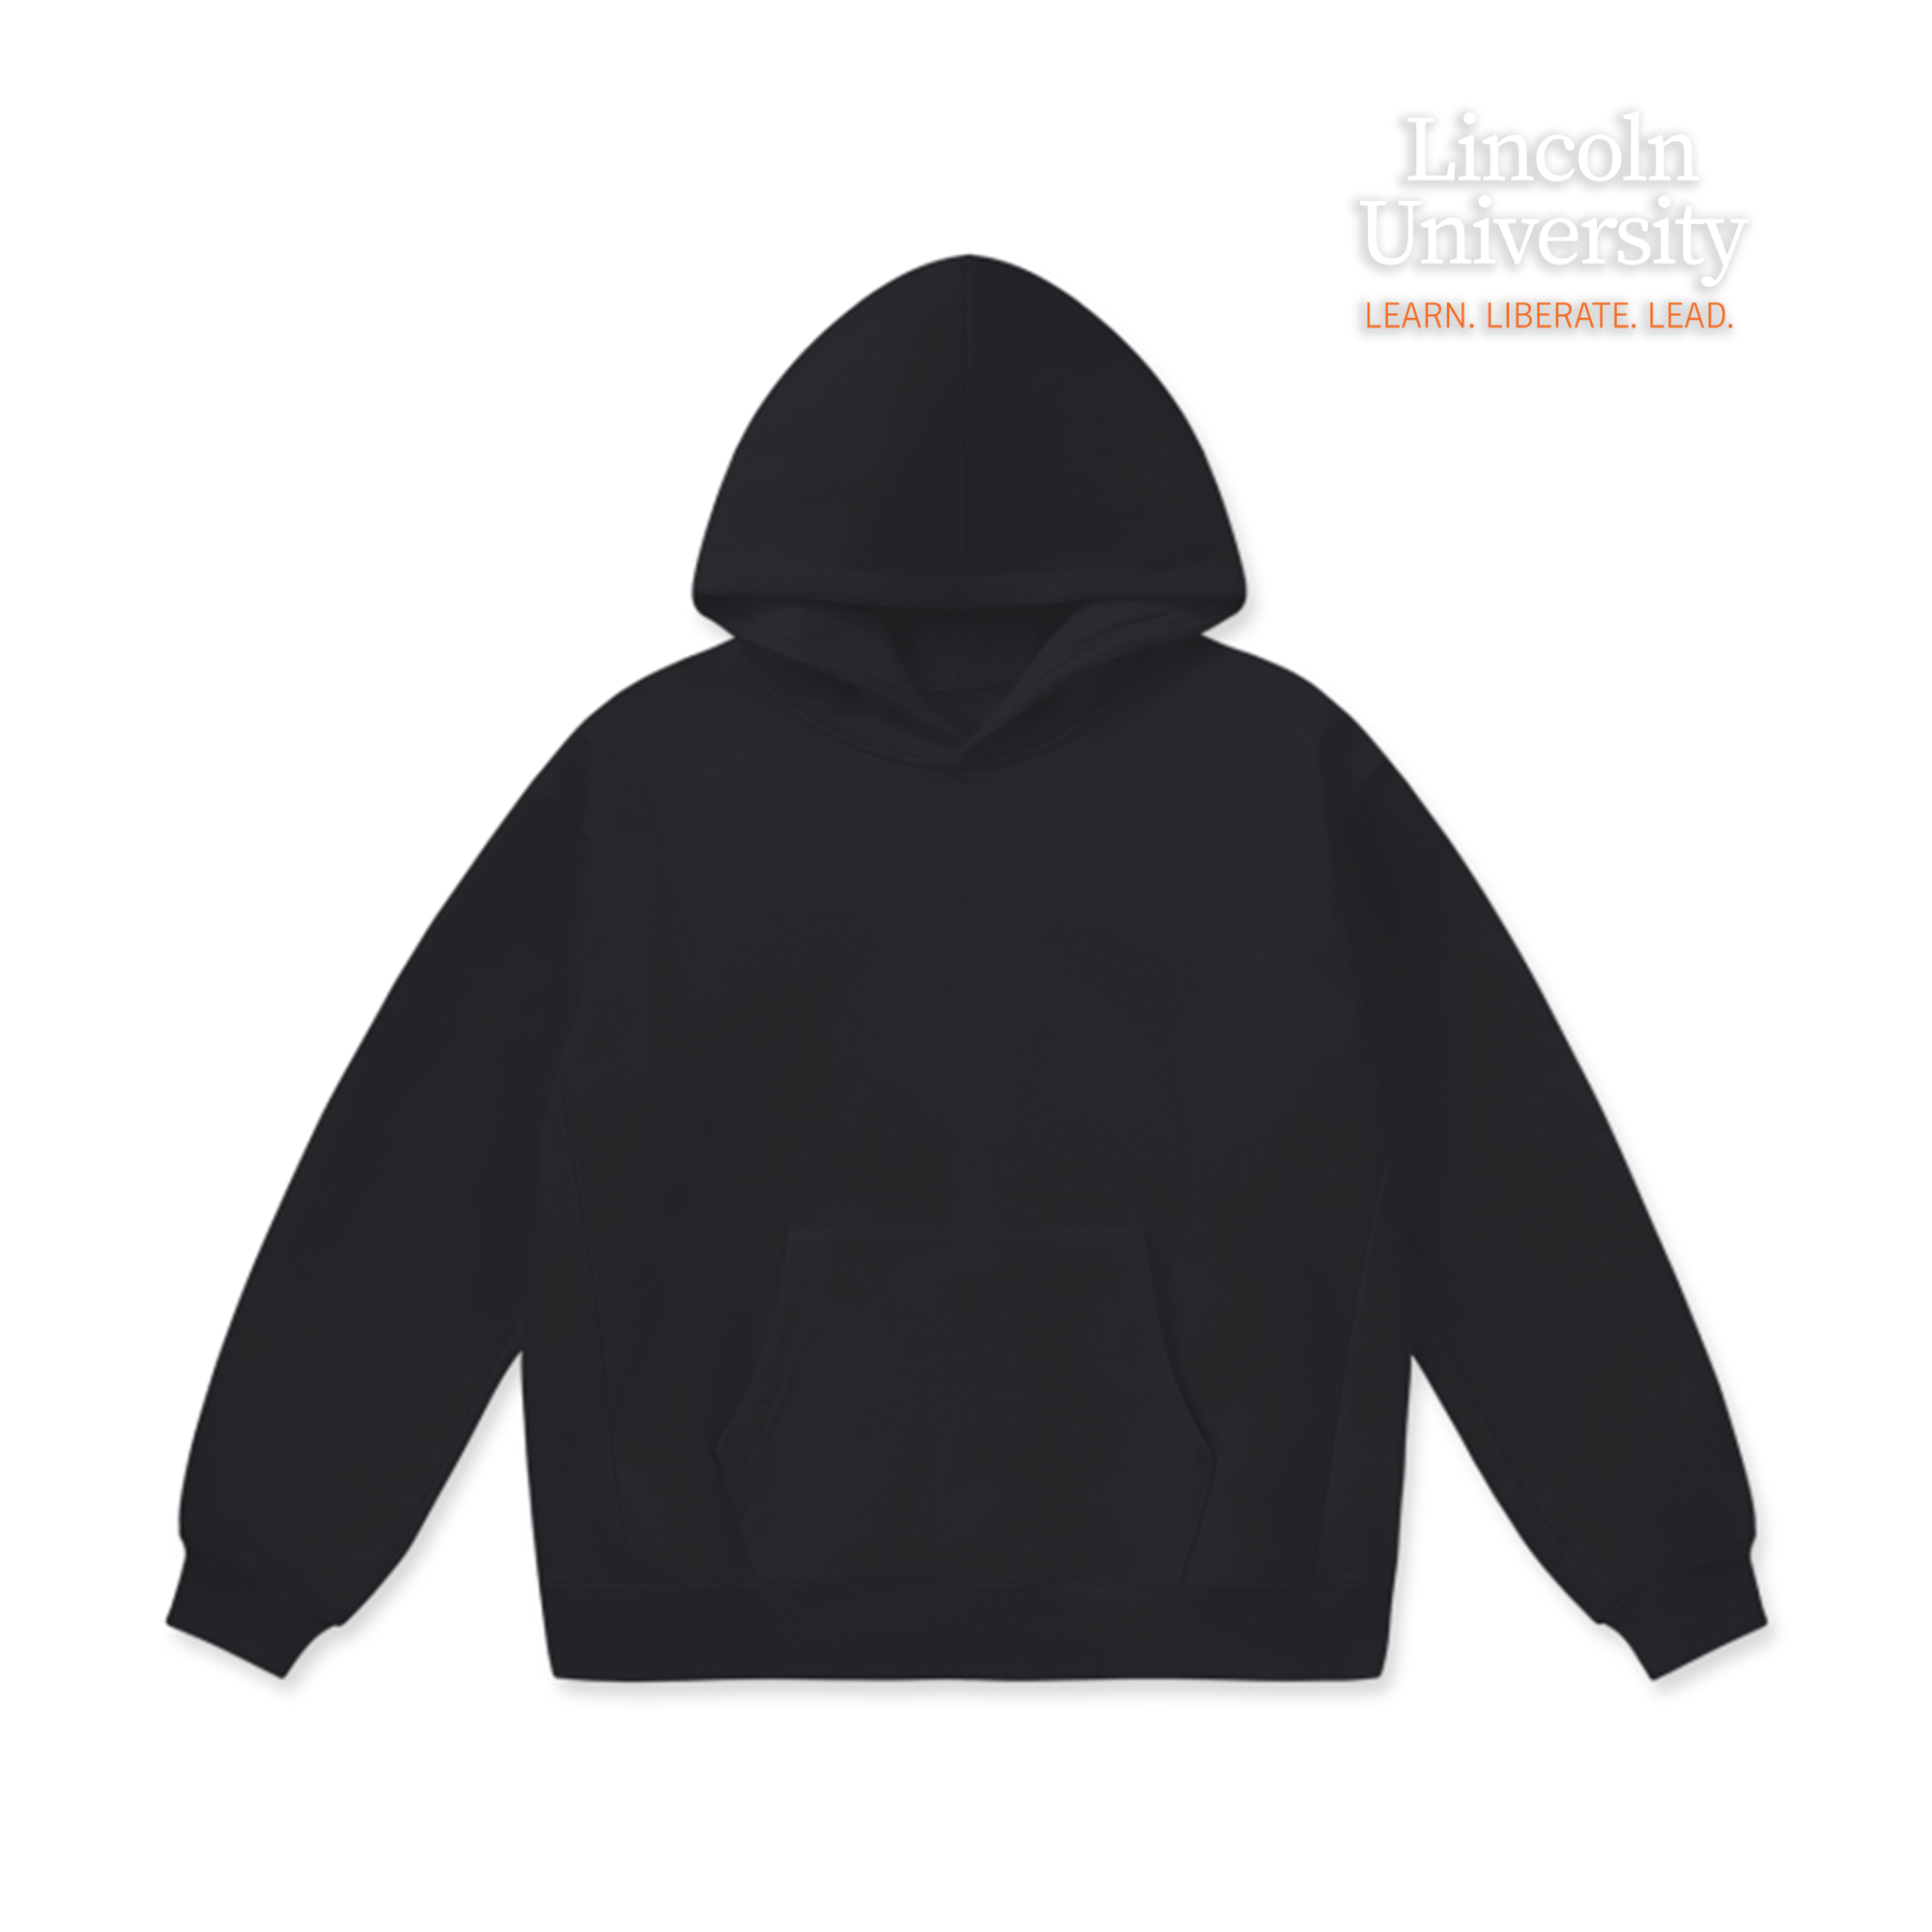 LCC Super Weighted Hoodie - Lincoln University (Modern Ver.2)